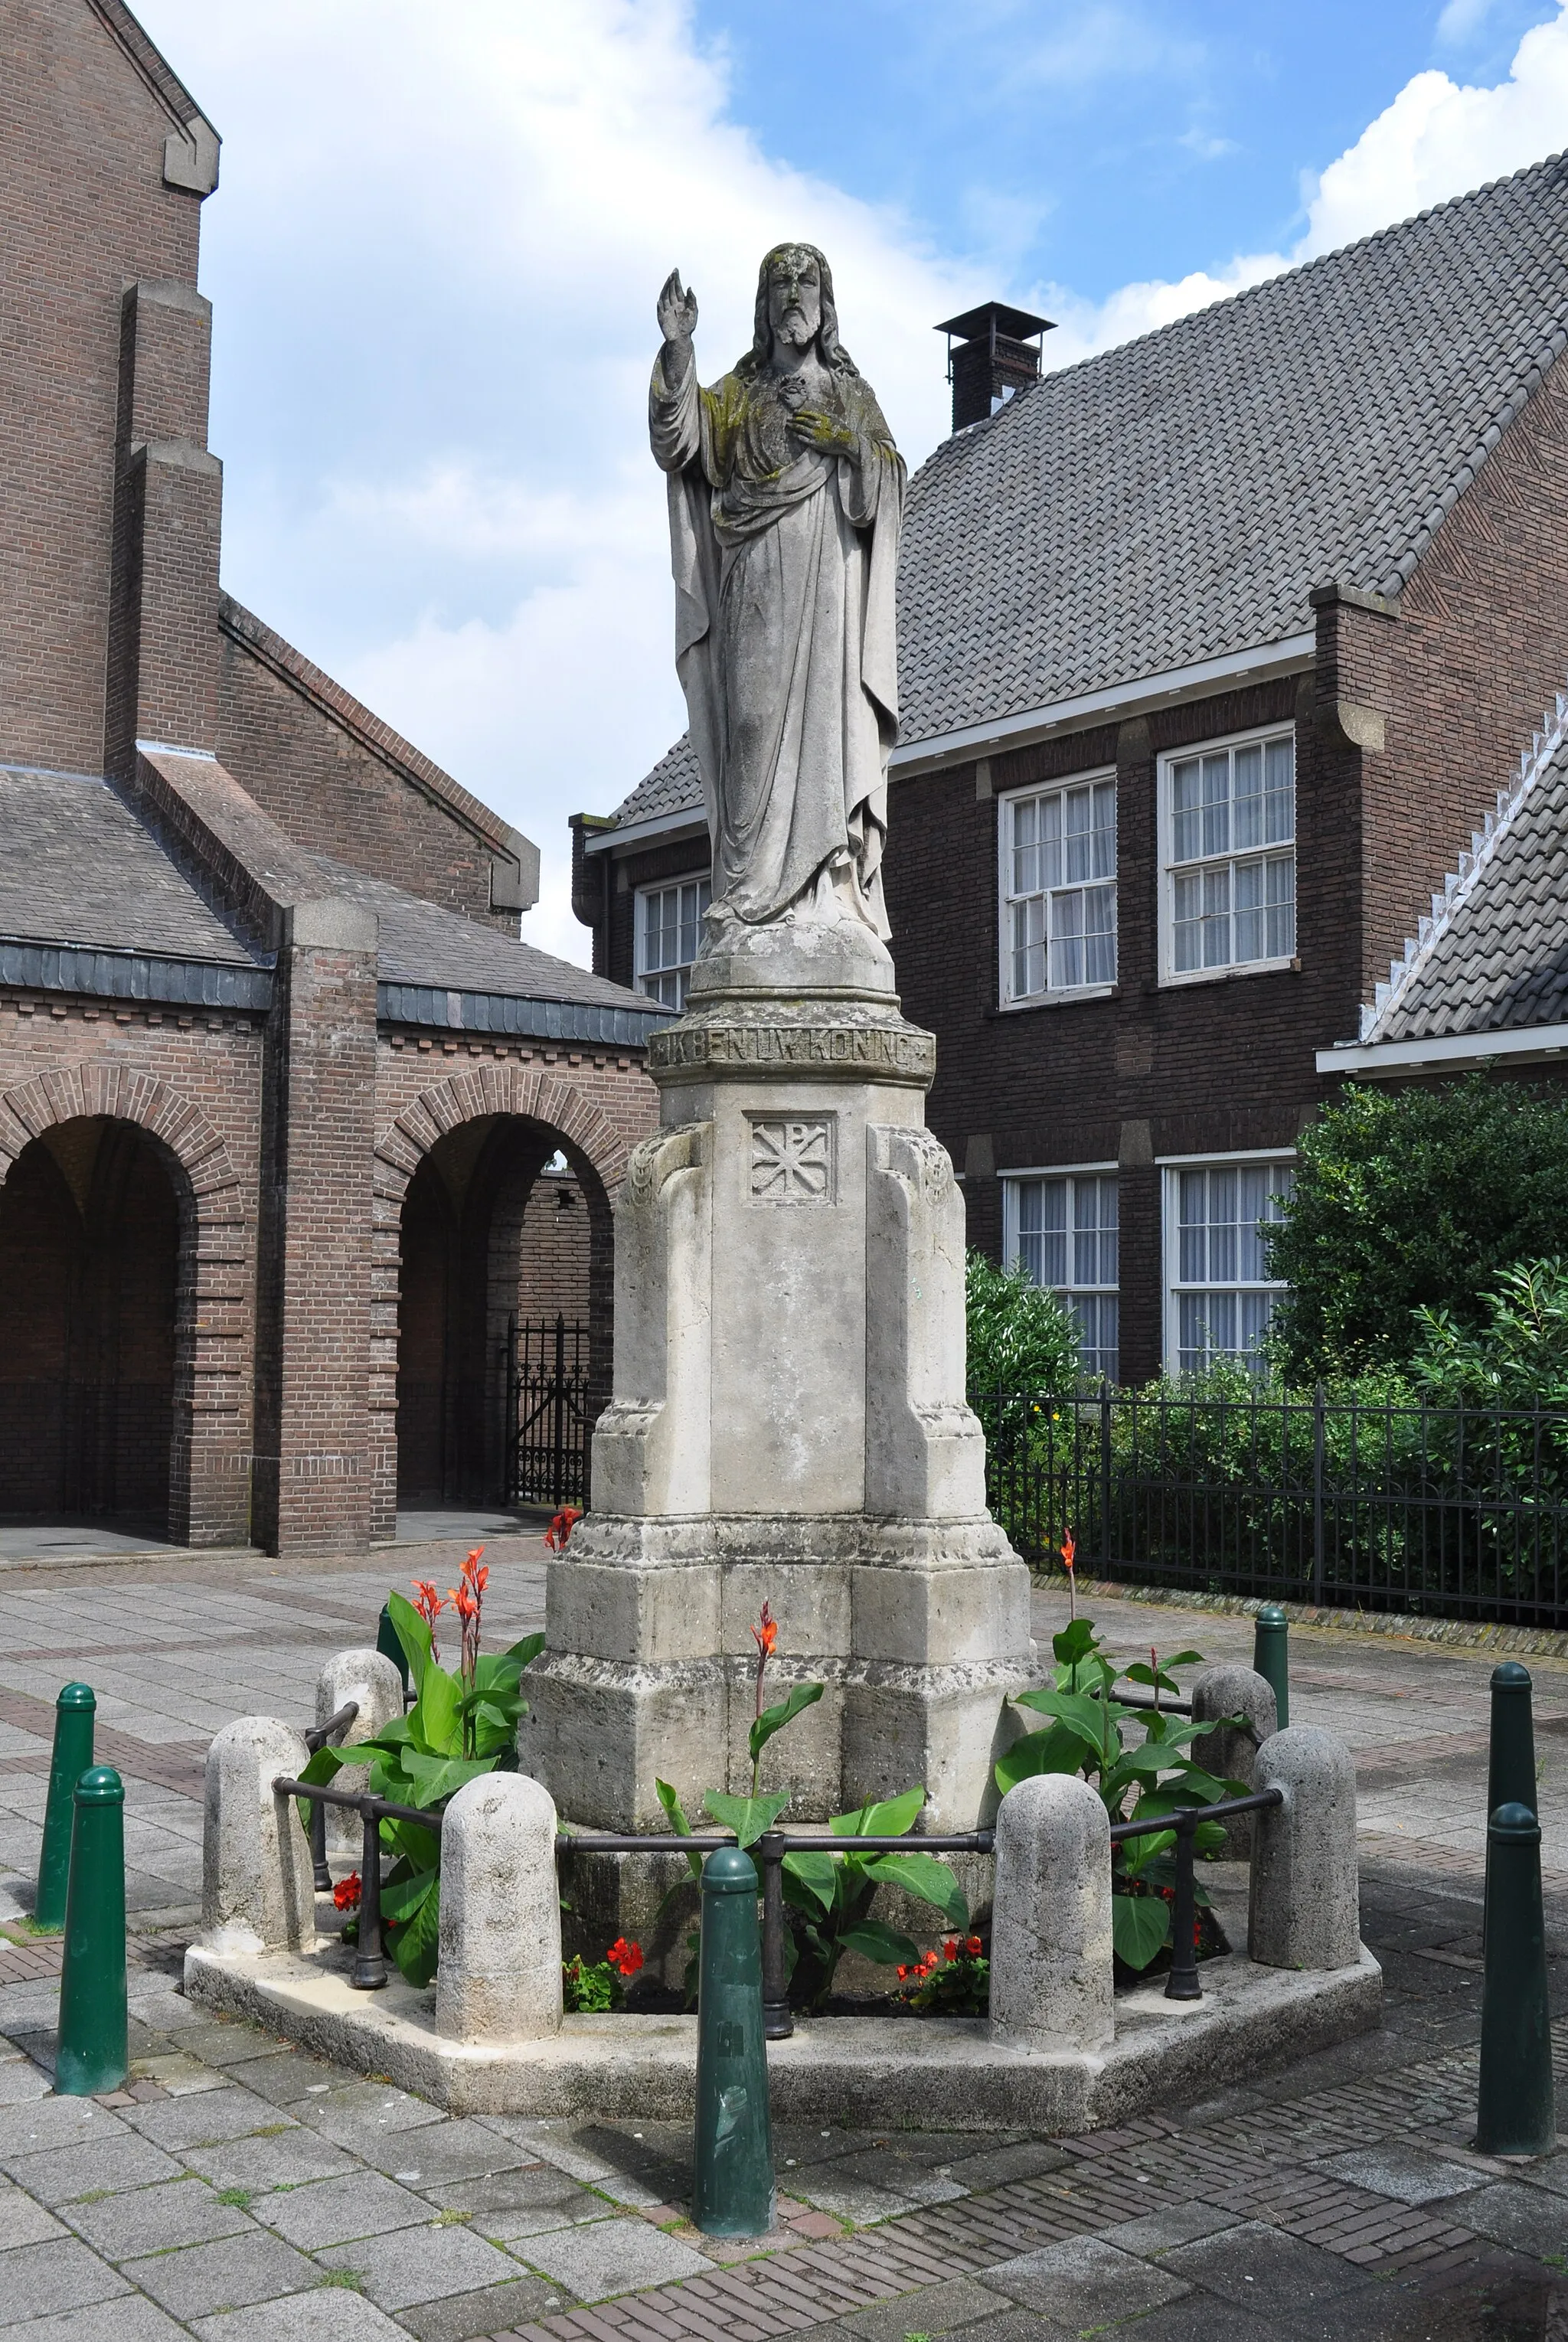 Photo showing: Sculpture of Christ, made by Jan Custers in 1921 and placed at the Markt in Waalre in front of the Willibrordus church.